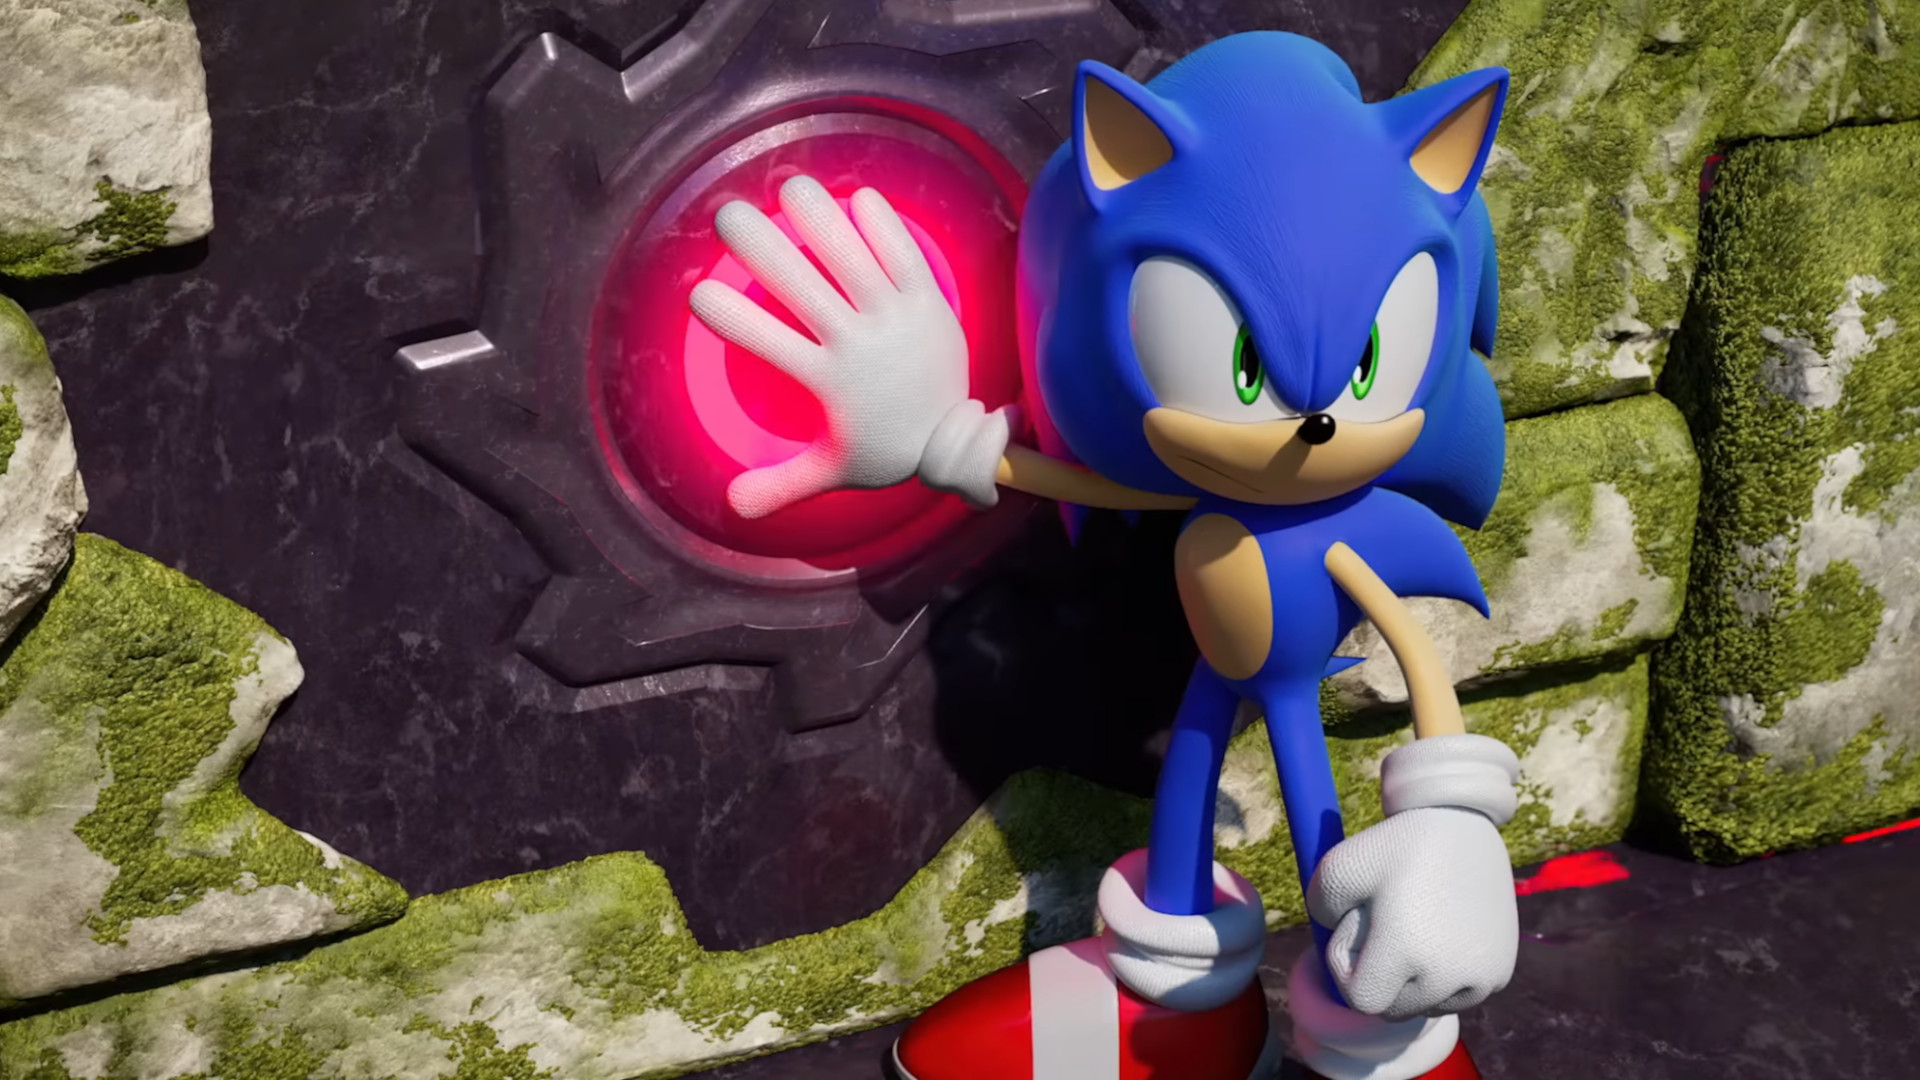 Sonic Frontiers system requirements demand the most popular Nvidia GPU